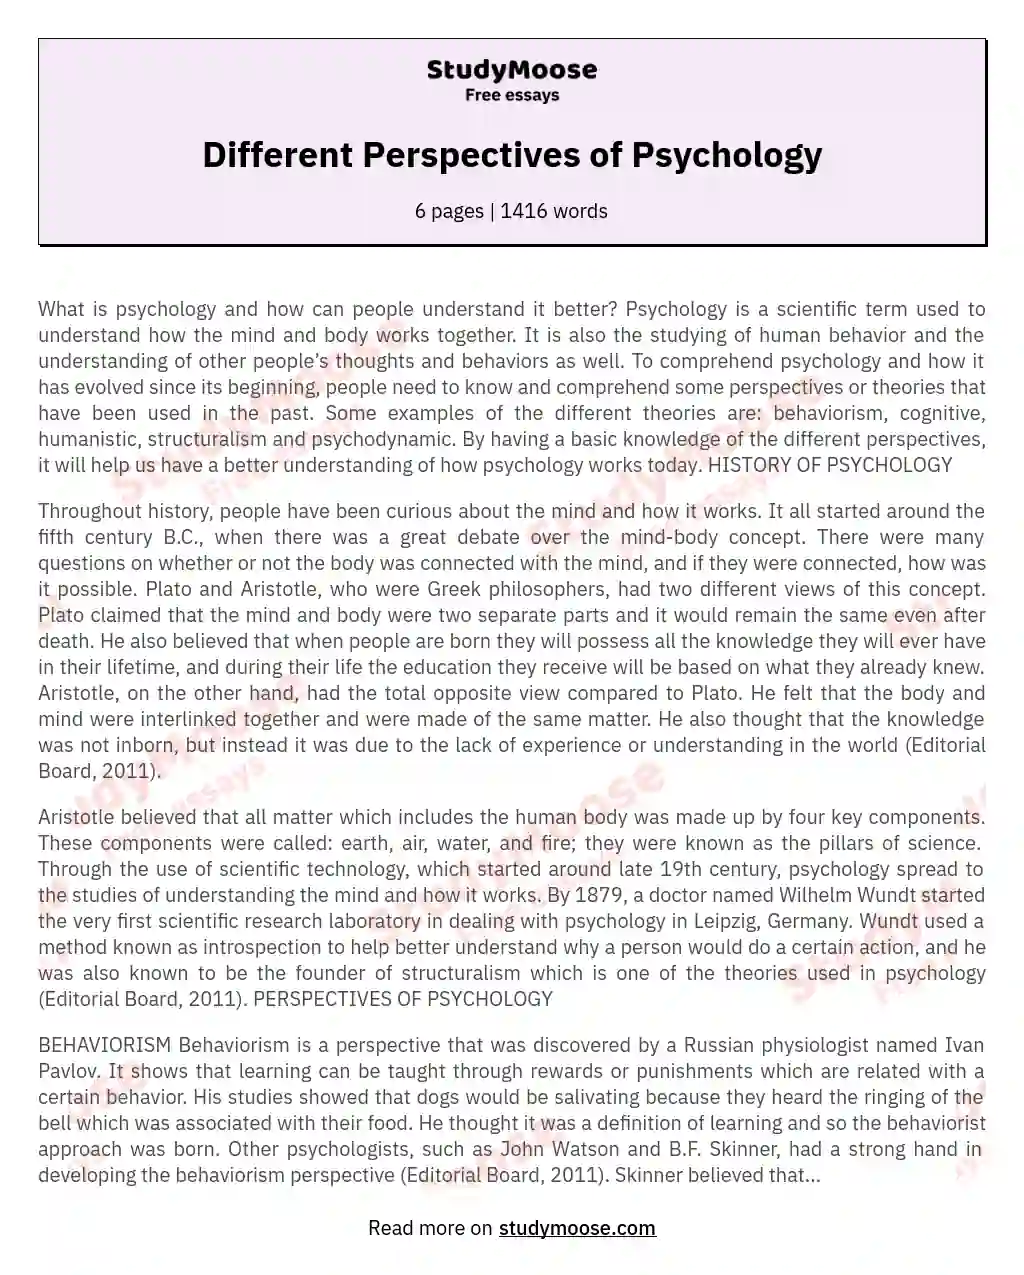 Different Perspectives of Psychology